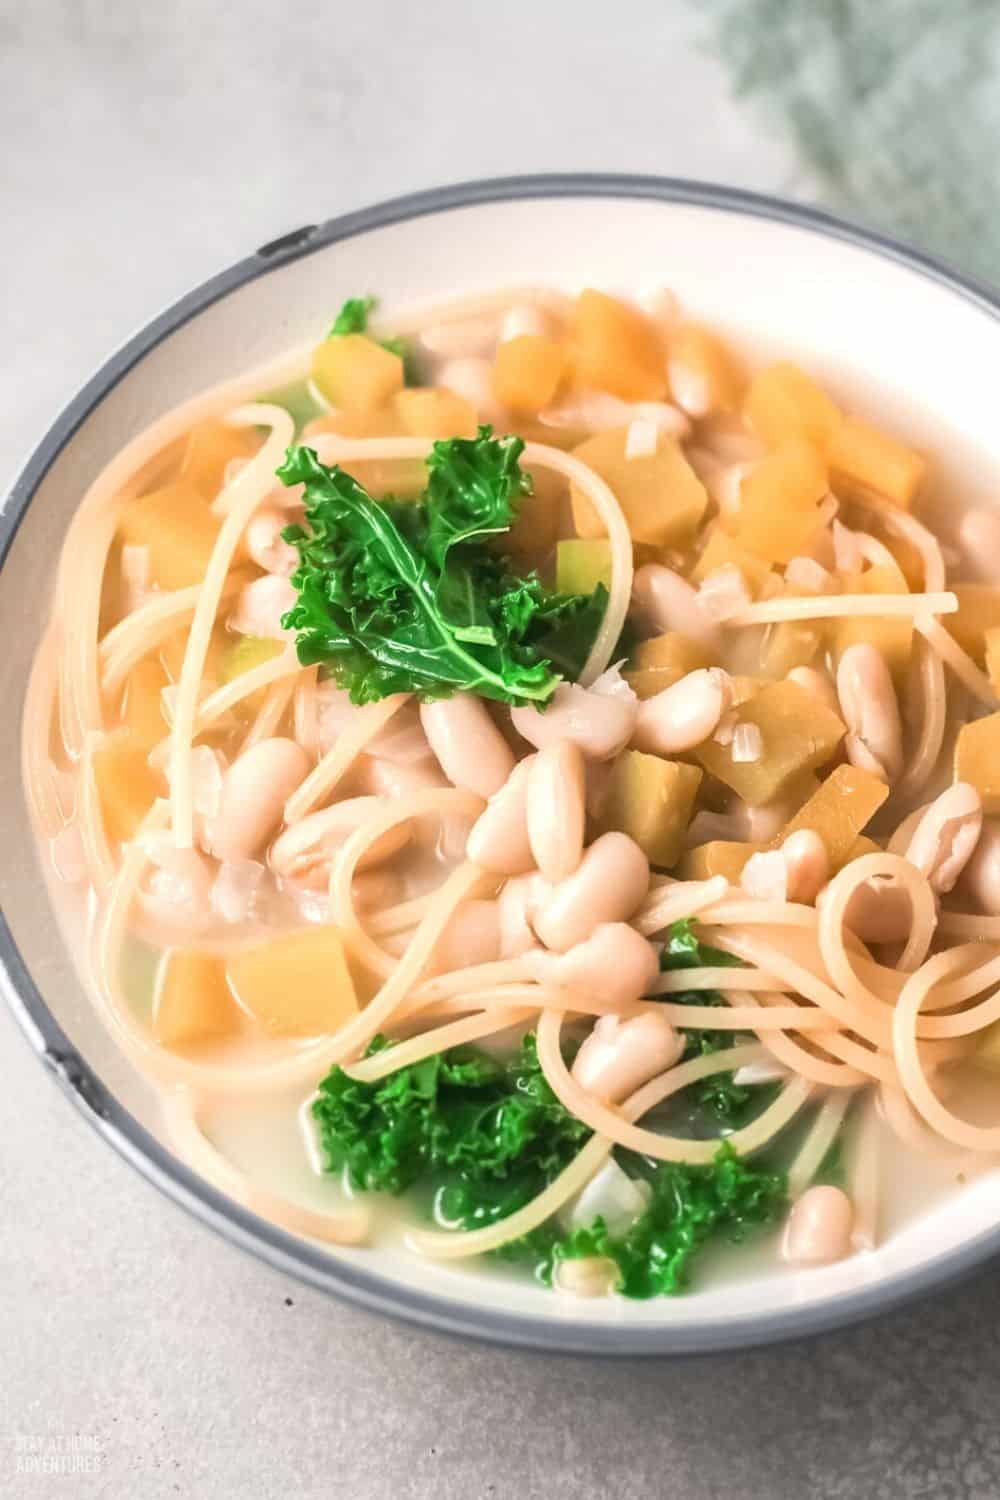 Porotos con rienda is a soup/stew made of boiled beans, spaghetti, pumpkin, onion, and greens of some sort. #soup #Chileanrecipe #beansoup #meatlesssoup via @mystayathome